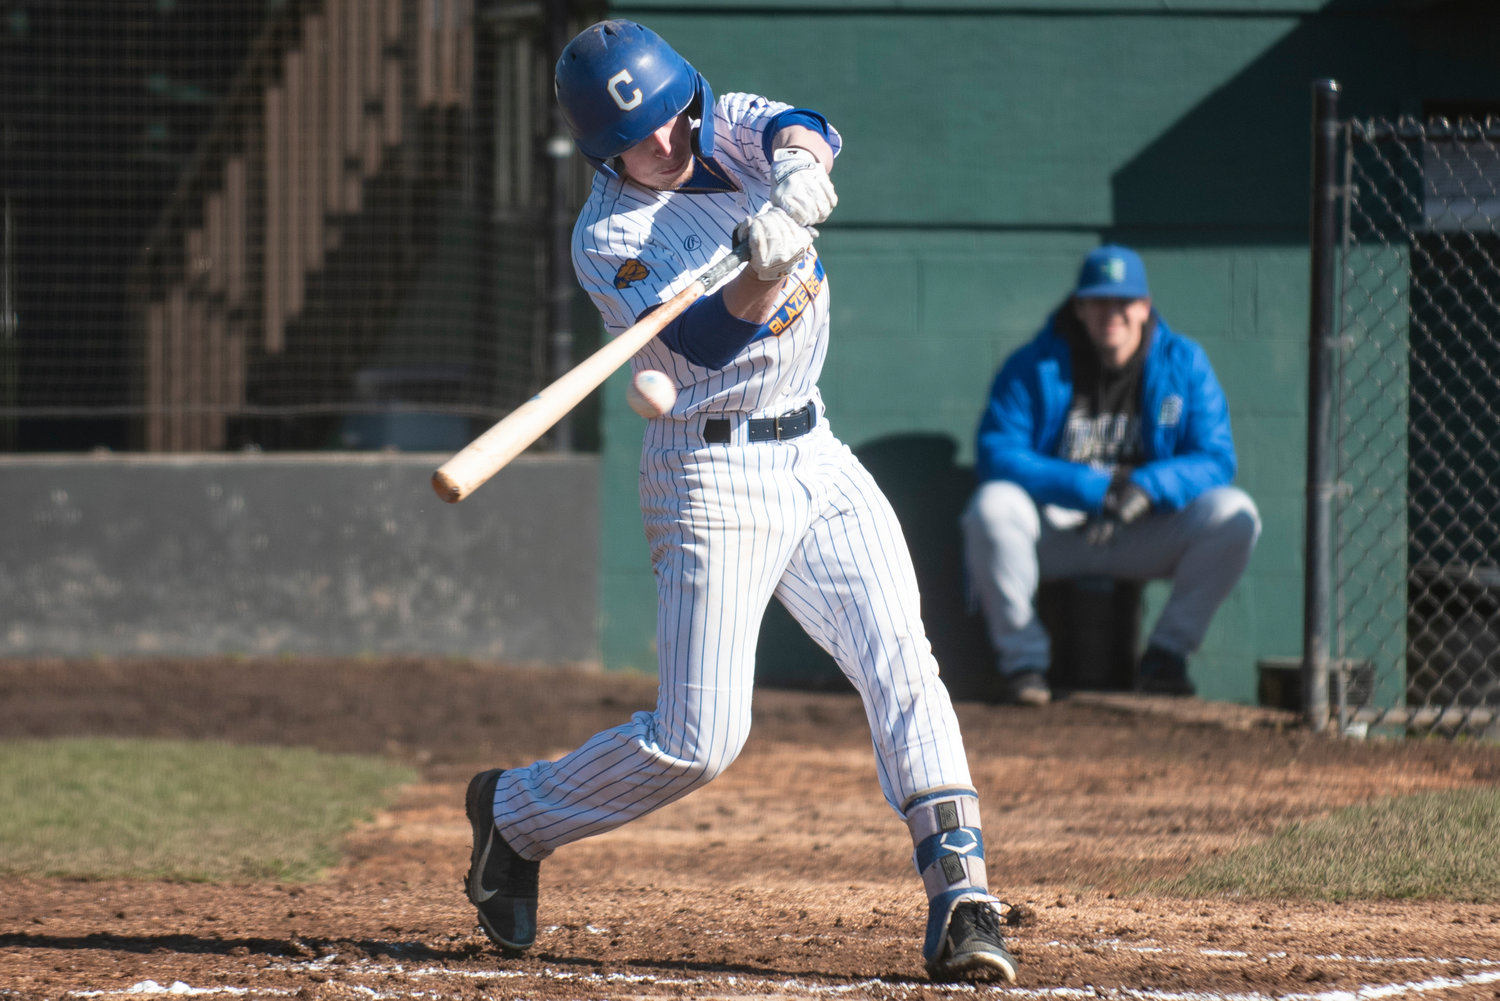 Centralia College's Jaymz Knowlton lines up an Edmonds's pitch during a home game on Feb. 25 at Wheeler Field.